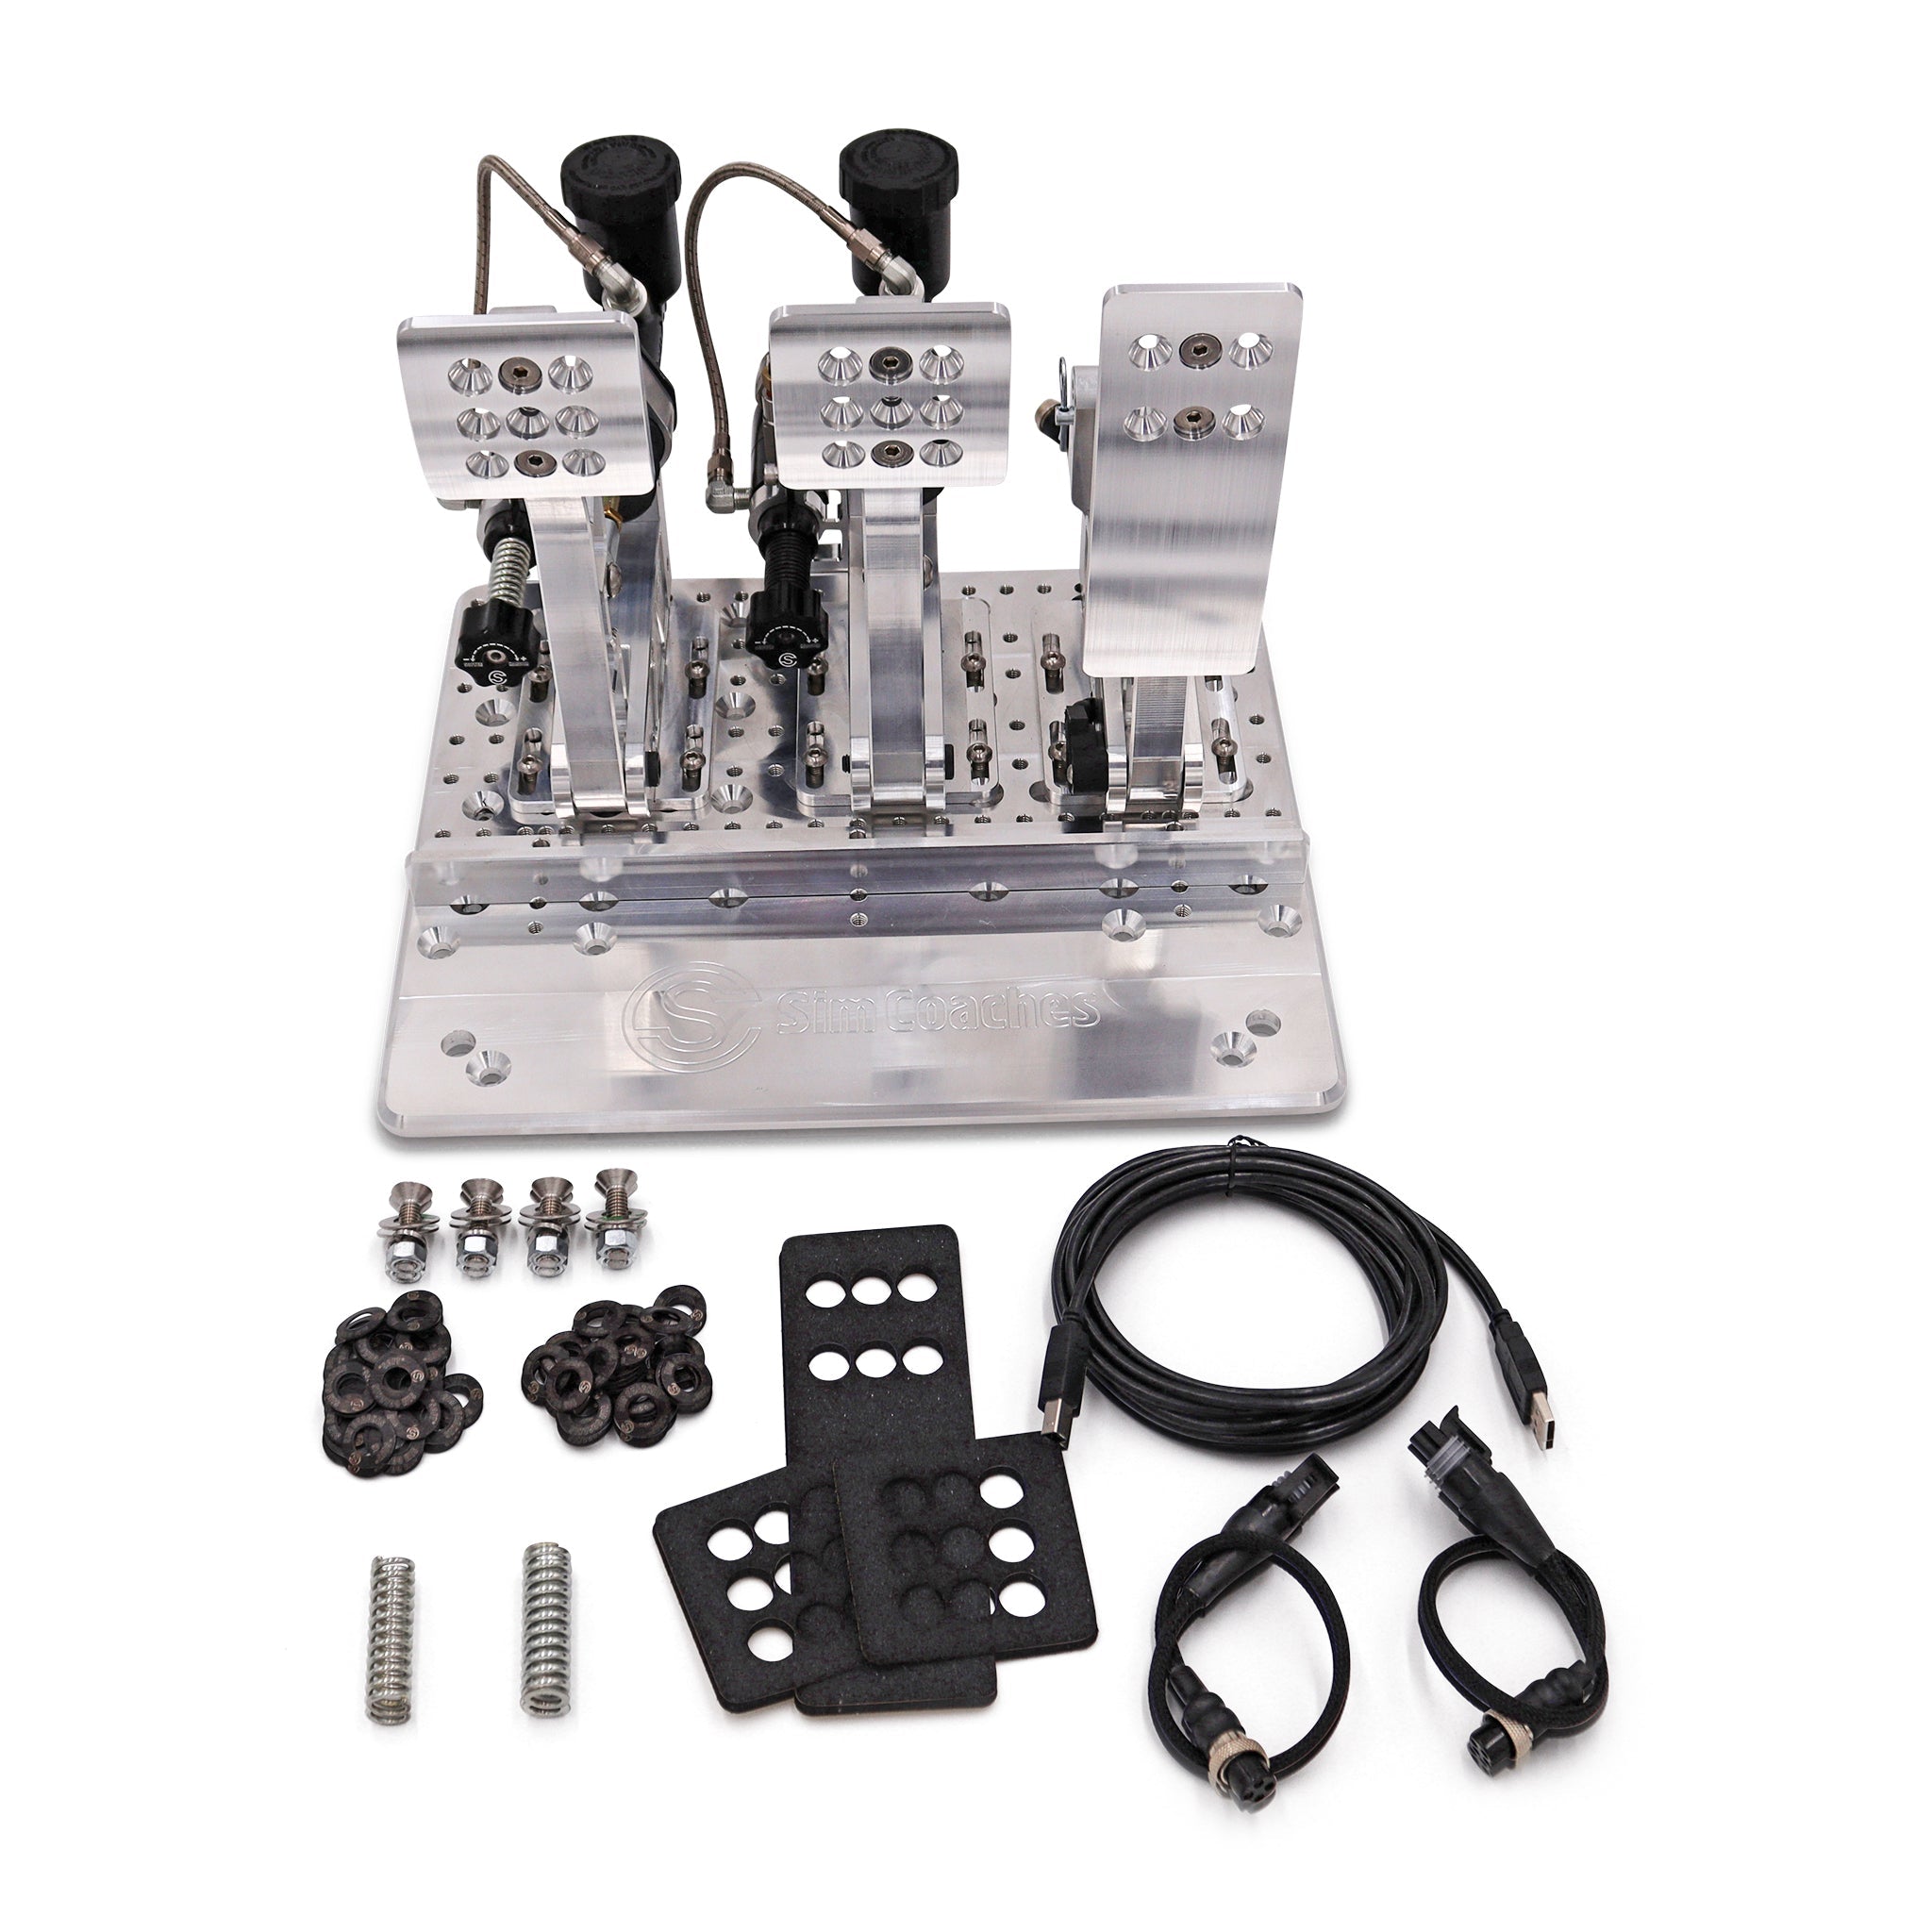 Everything included with Sim Coaches hydraulic sim racing pedals.